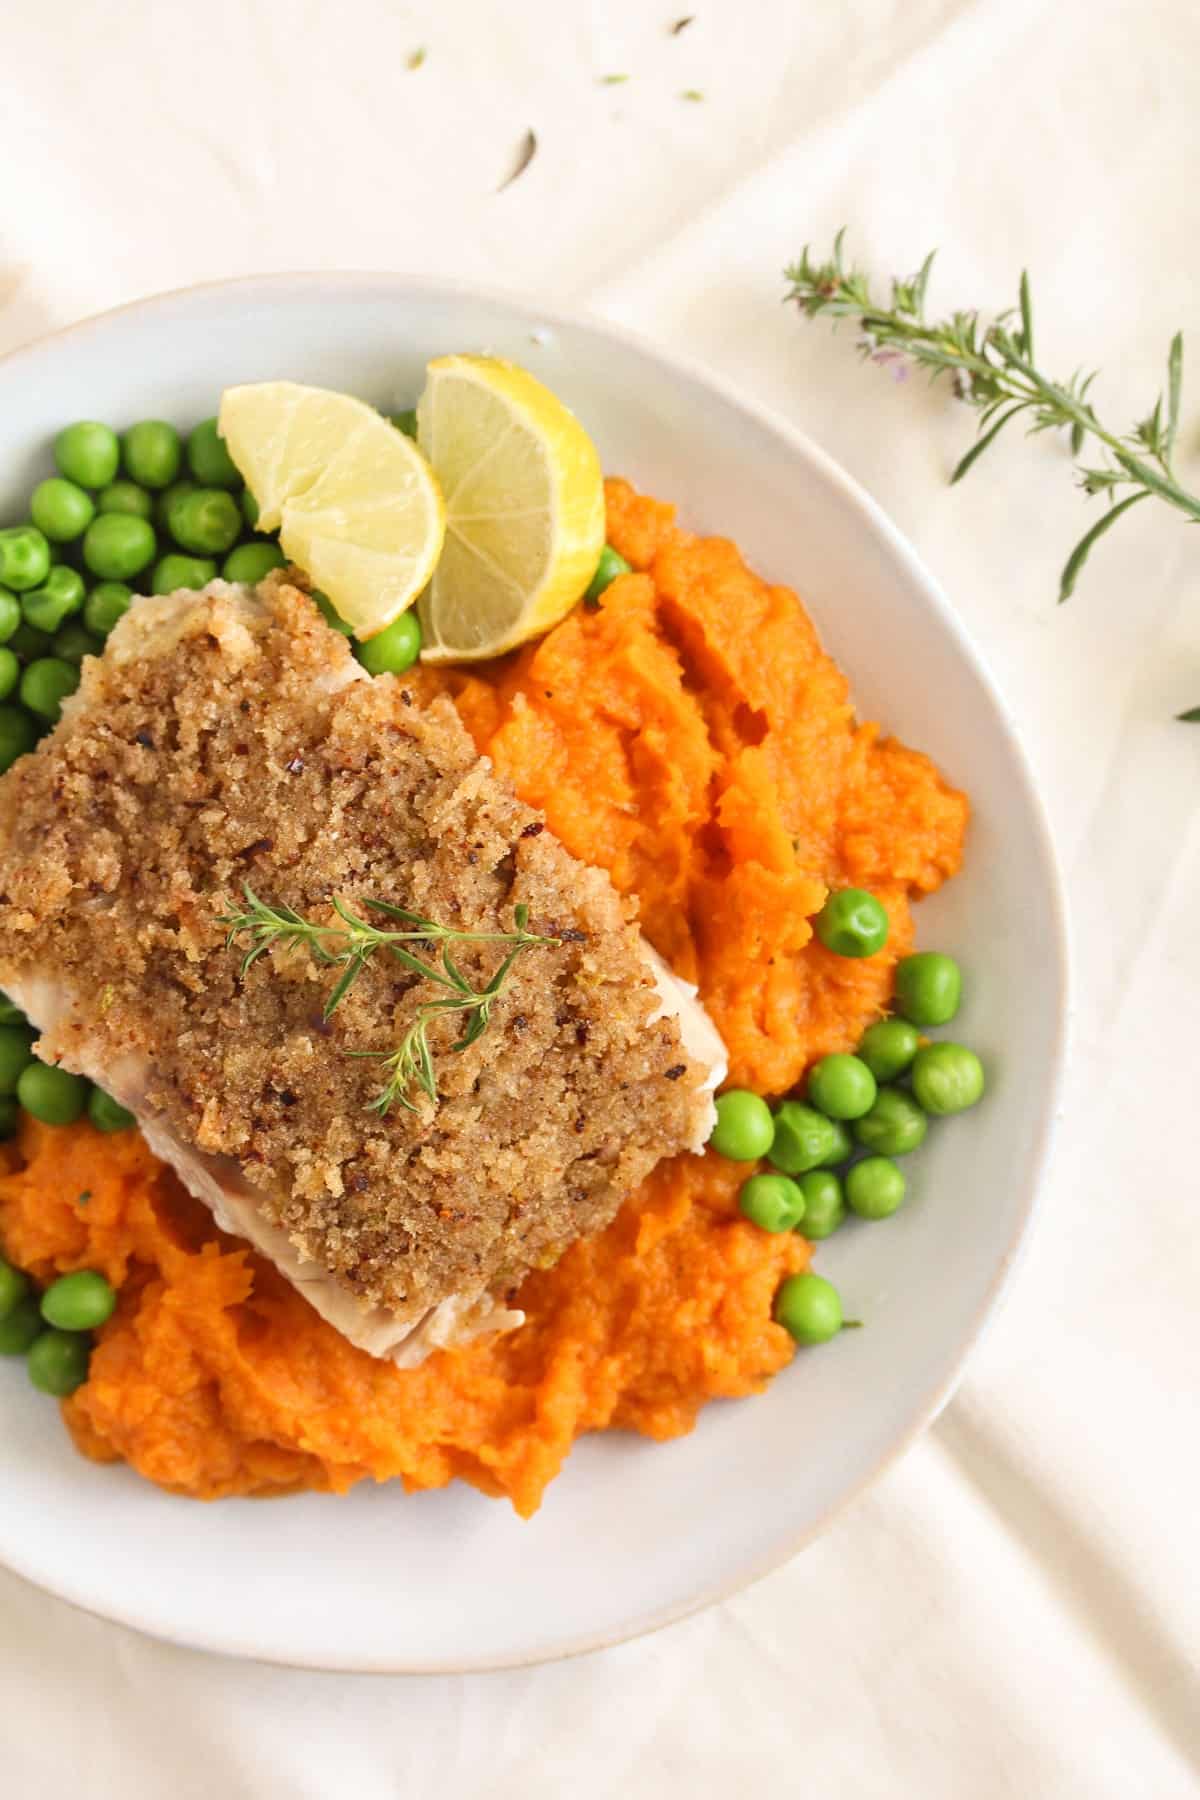 close up of plate with crusted salmon on top of mashed sweet potatoes with peas and limes.